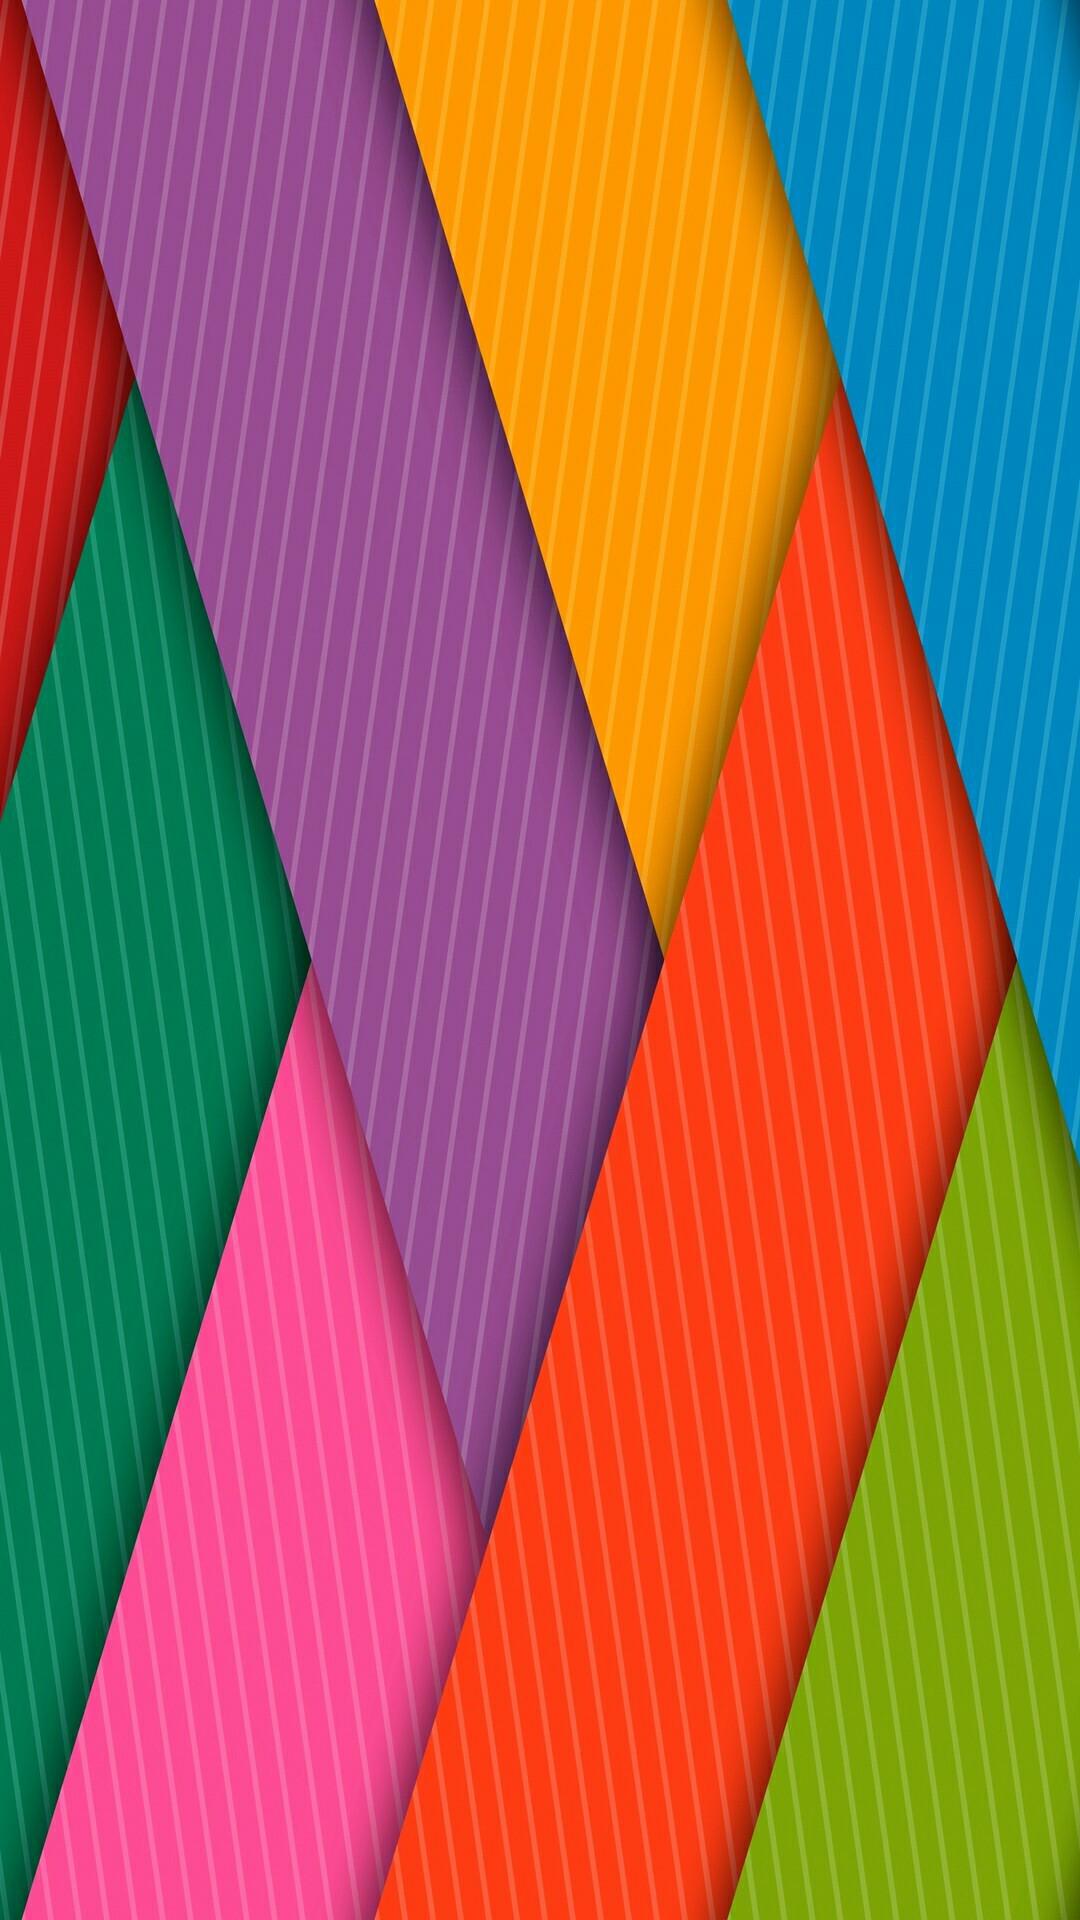 Colorful iPhone Wallpaper